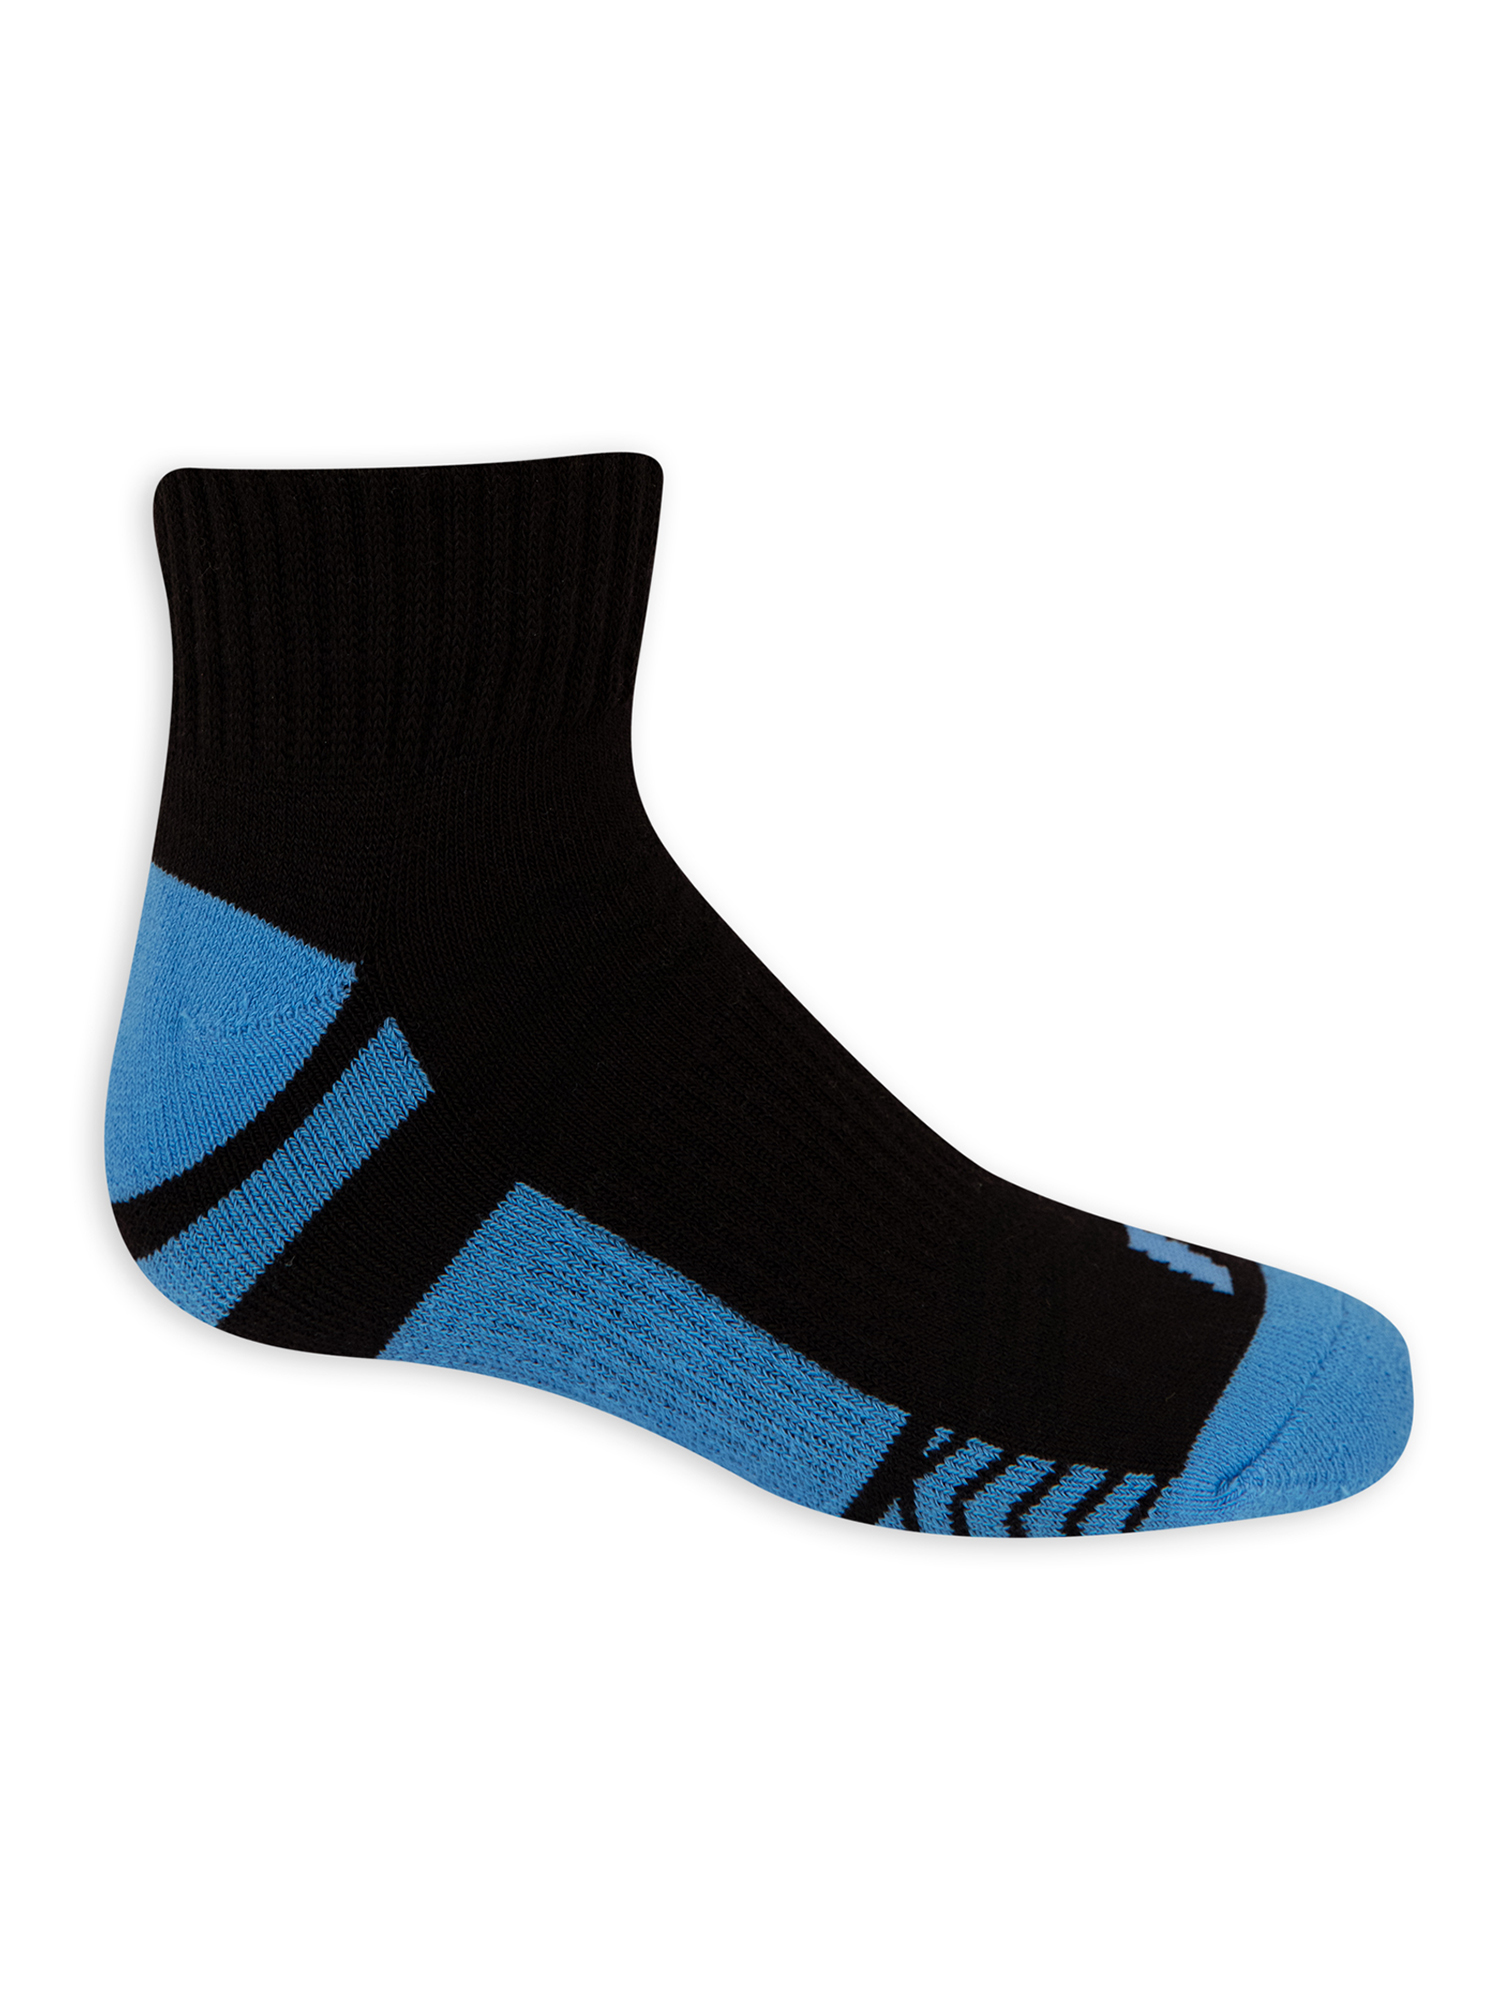 Russell Active Boys Ankle Socks 6 Pack Socks - image 2 of 4